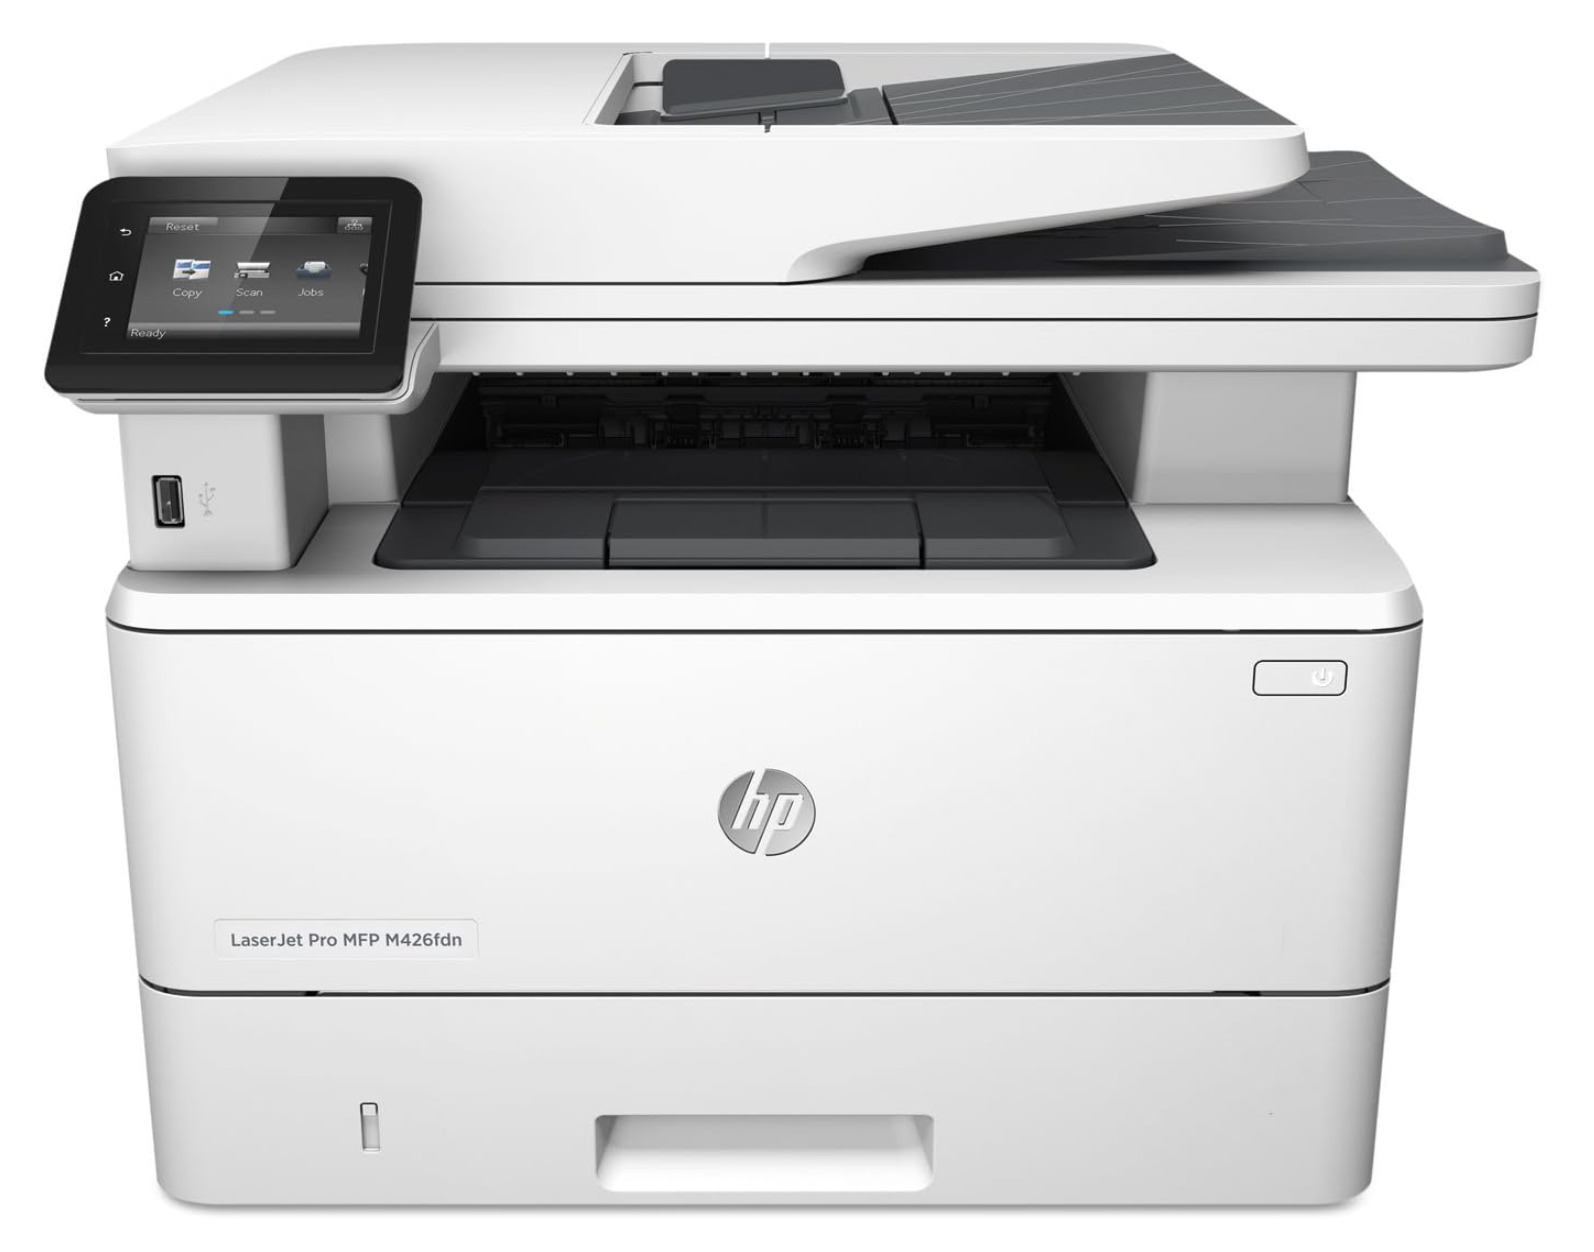 HP LaserJet Pro M426fdn All-in-One Laser Printer with Built-in Ethernet -PERFECT